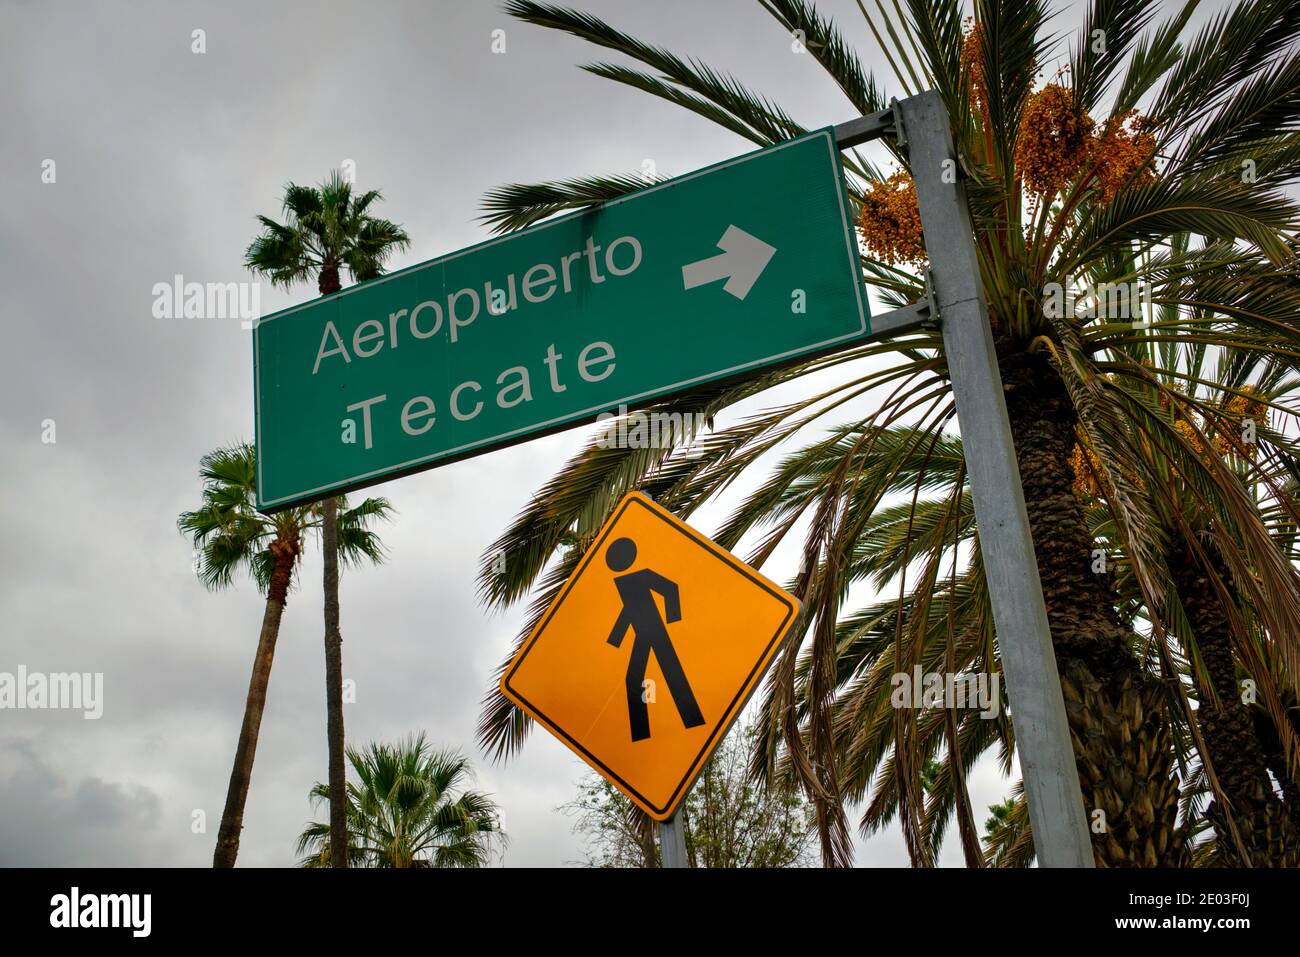 Tijuana, Mexico - October 30, 2017: Yellow diamond shaped pedestrian access sign with green sign indicating direction to Airport Tecate Stock Photo